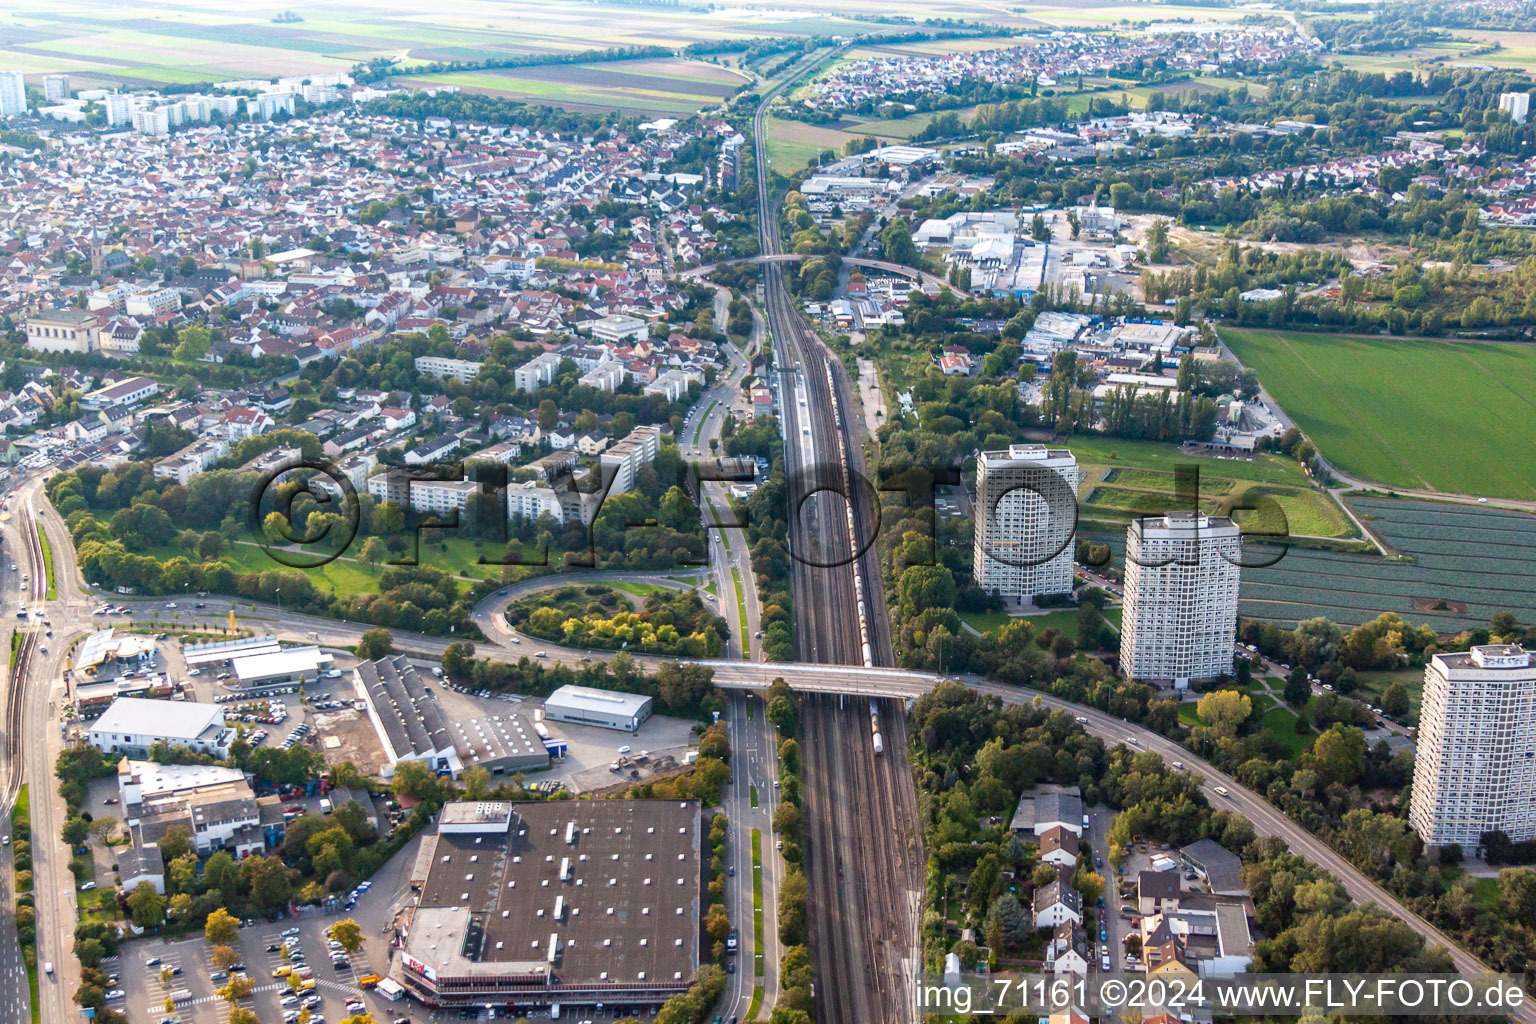 Bird's eye view of BG accident clinic in the district Oggersheim in Ludwigshafen am Rhein in the state Rhineland-Palatinate, Germany